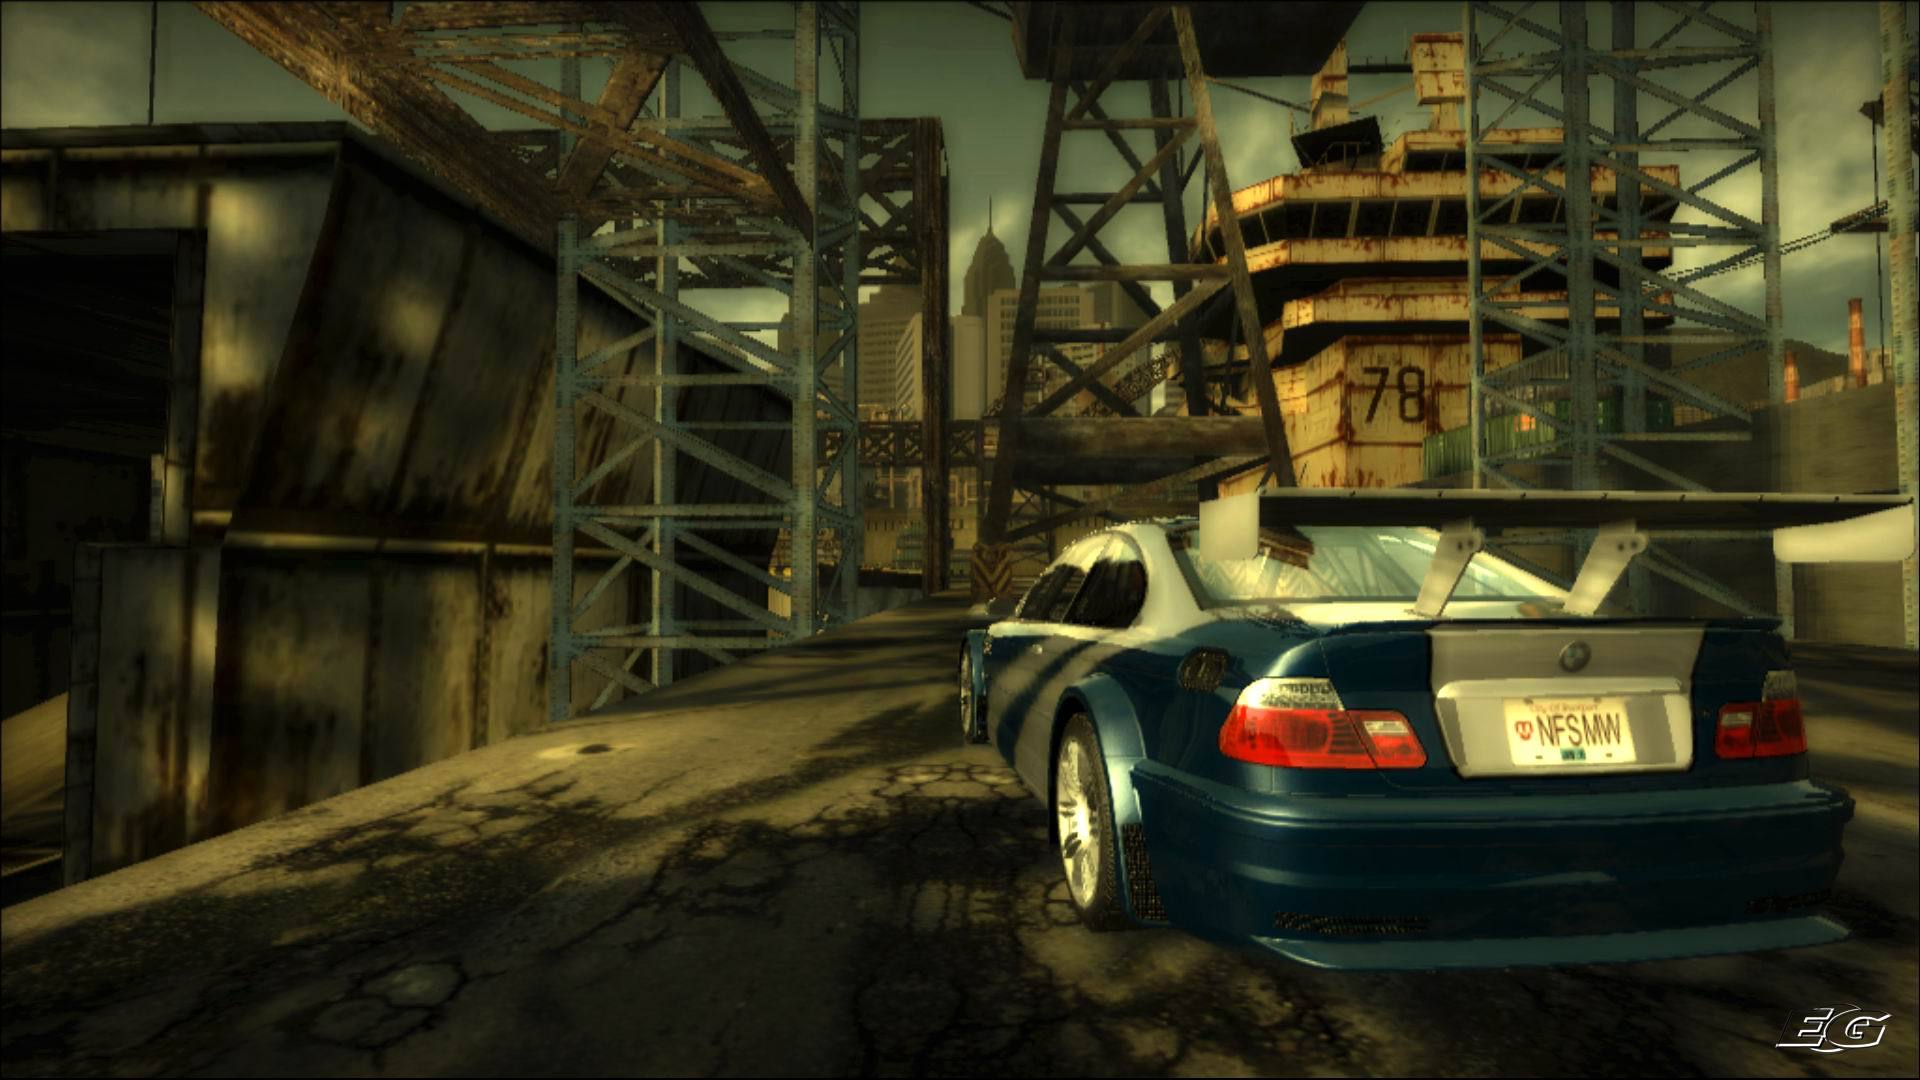 Free Download Nfs Most Wanted Wallpapers X For Your Desktop Mobile Tablet Explore